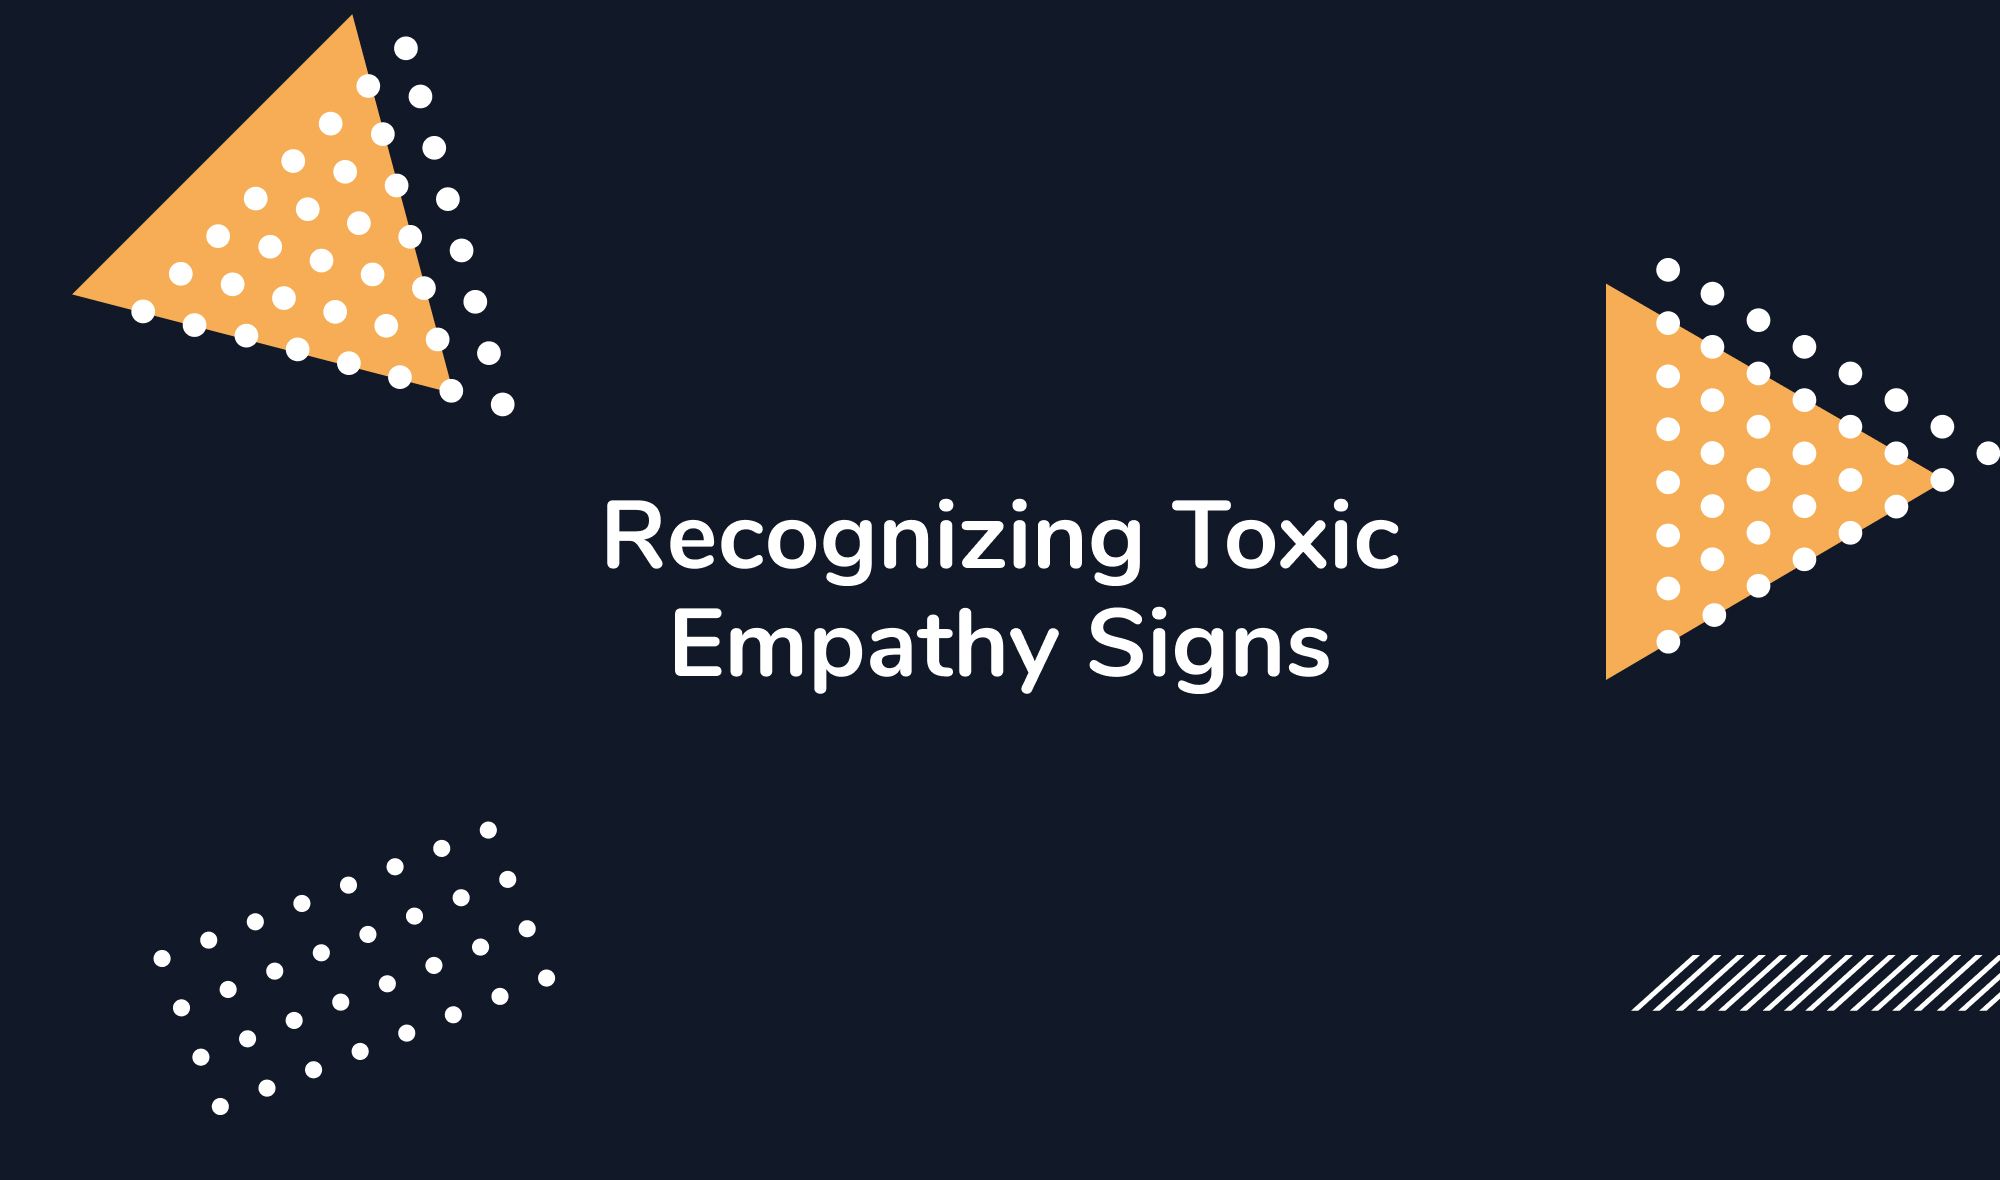 Recognizing Toxic Empathy Signs